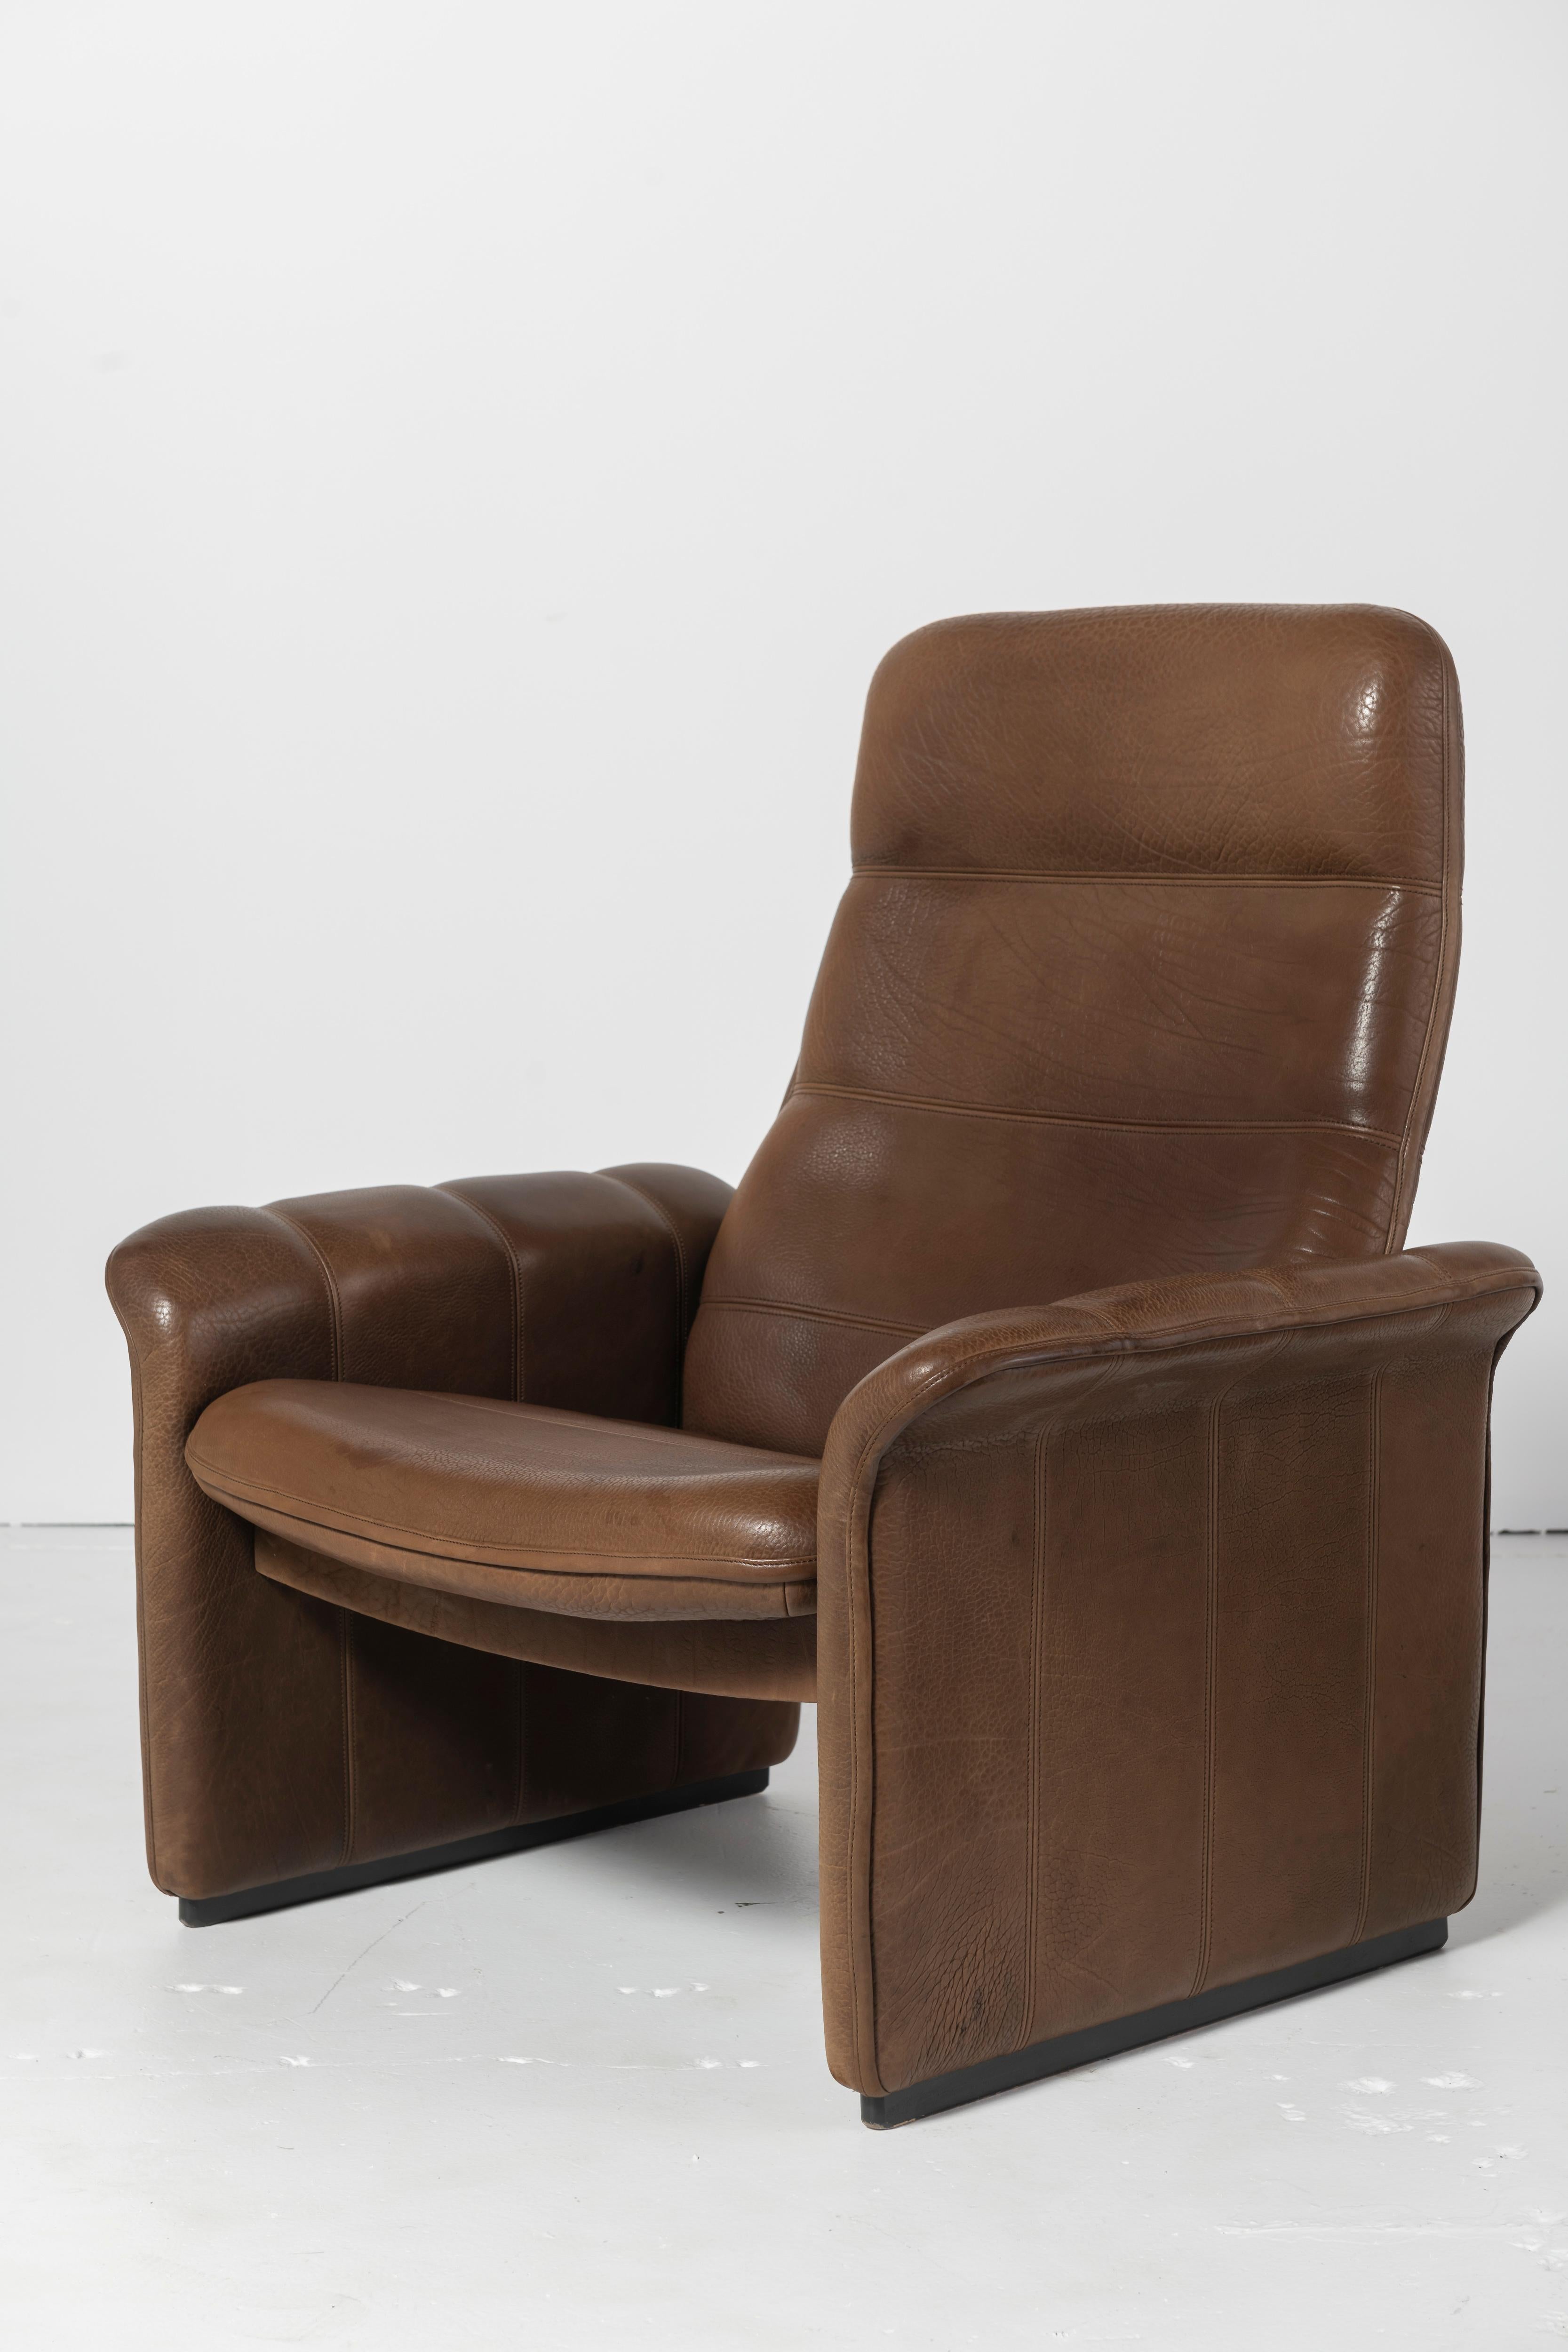 Wood De Sede Adjustable Leather Lounge Chair and Ottoman